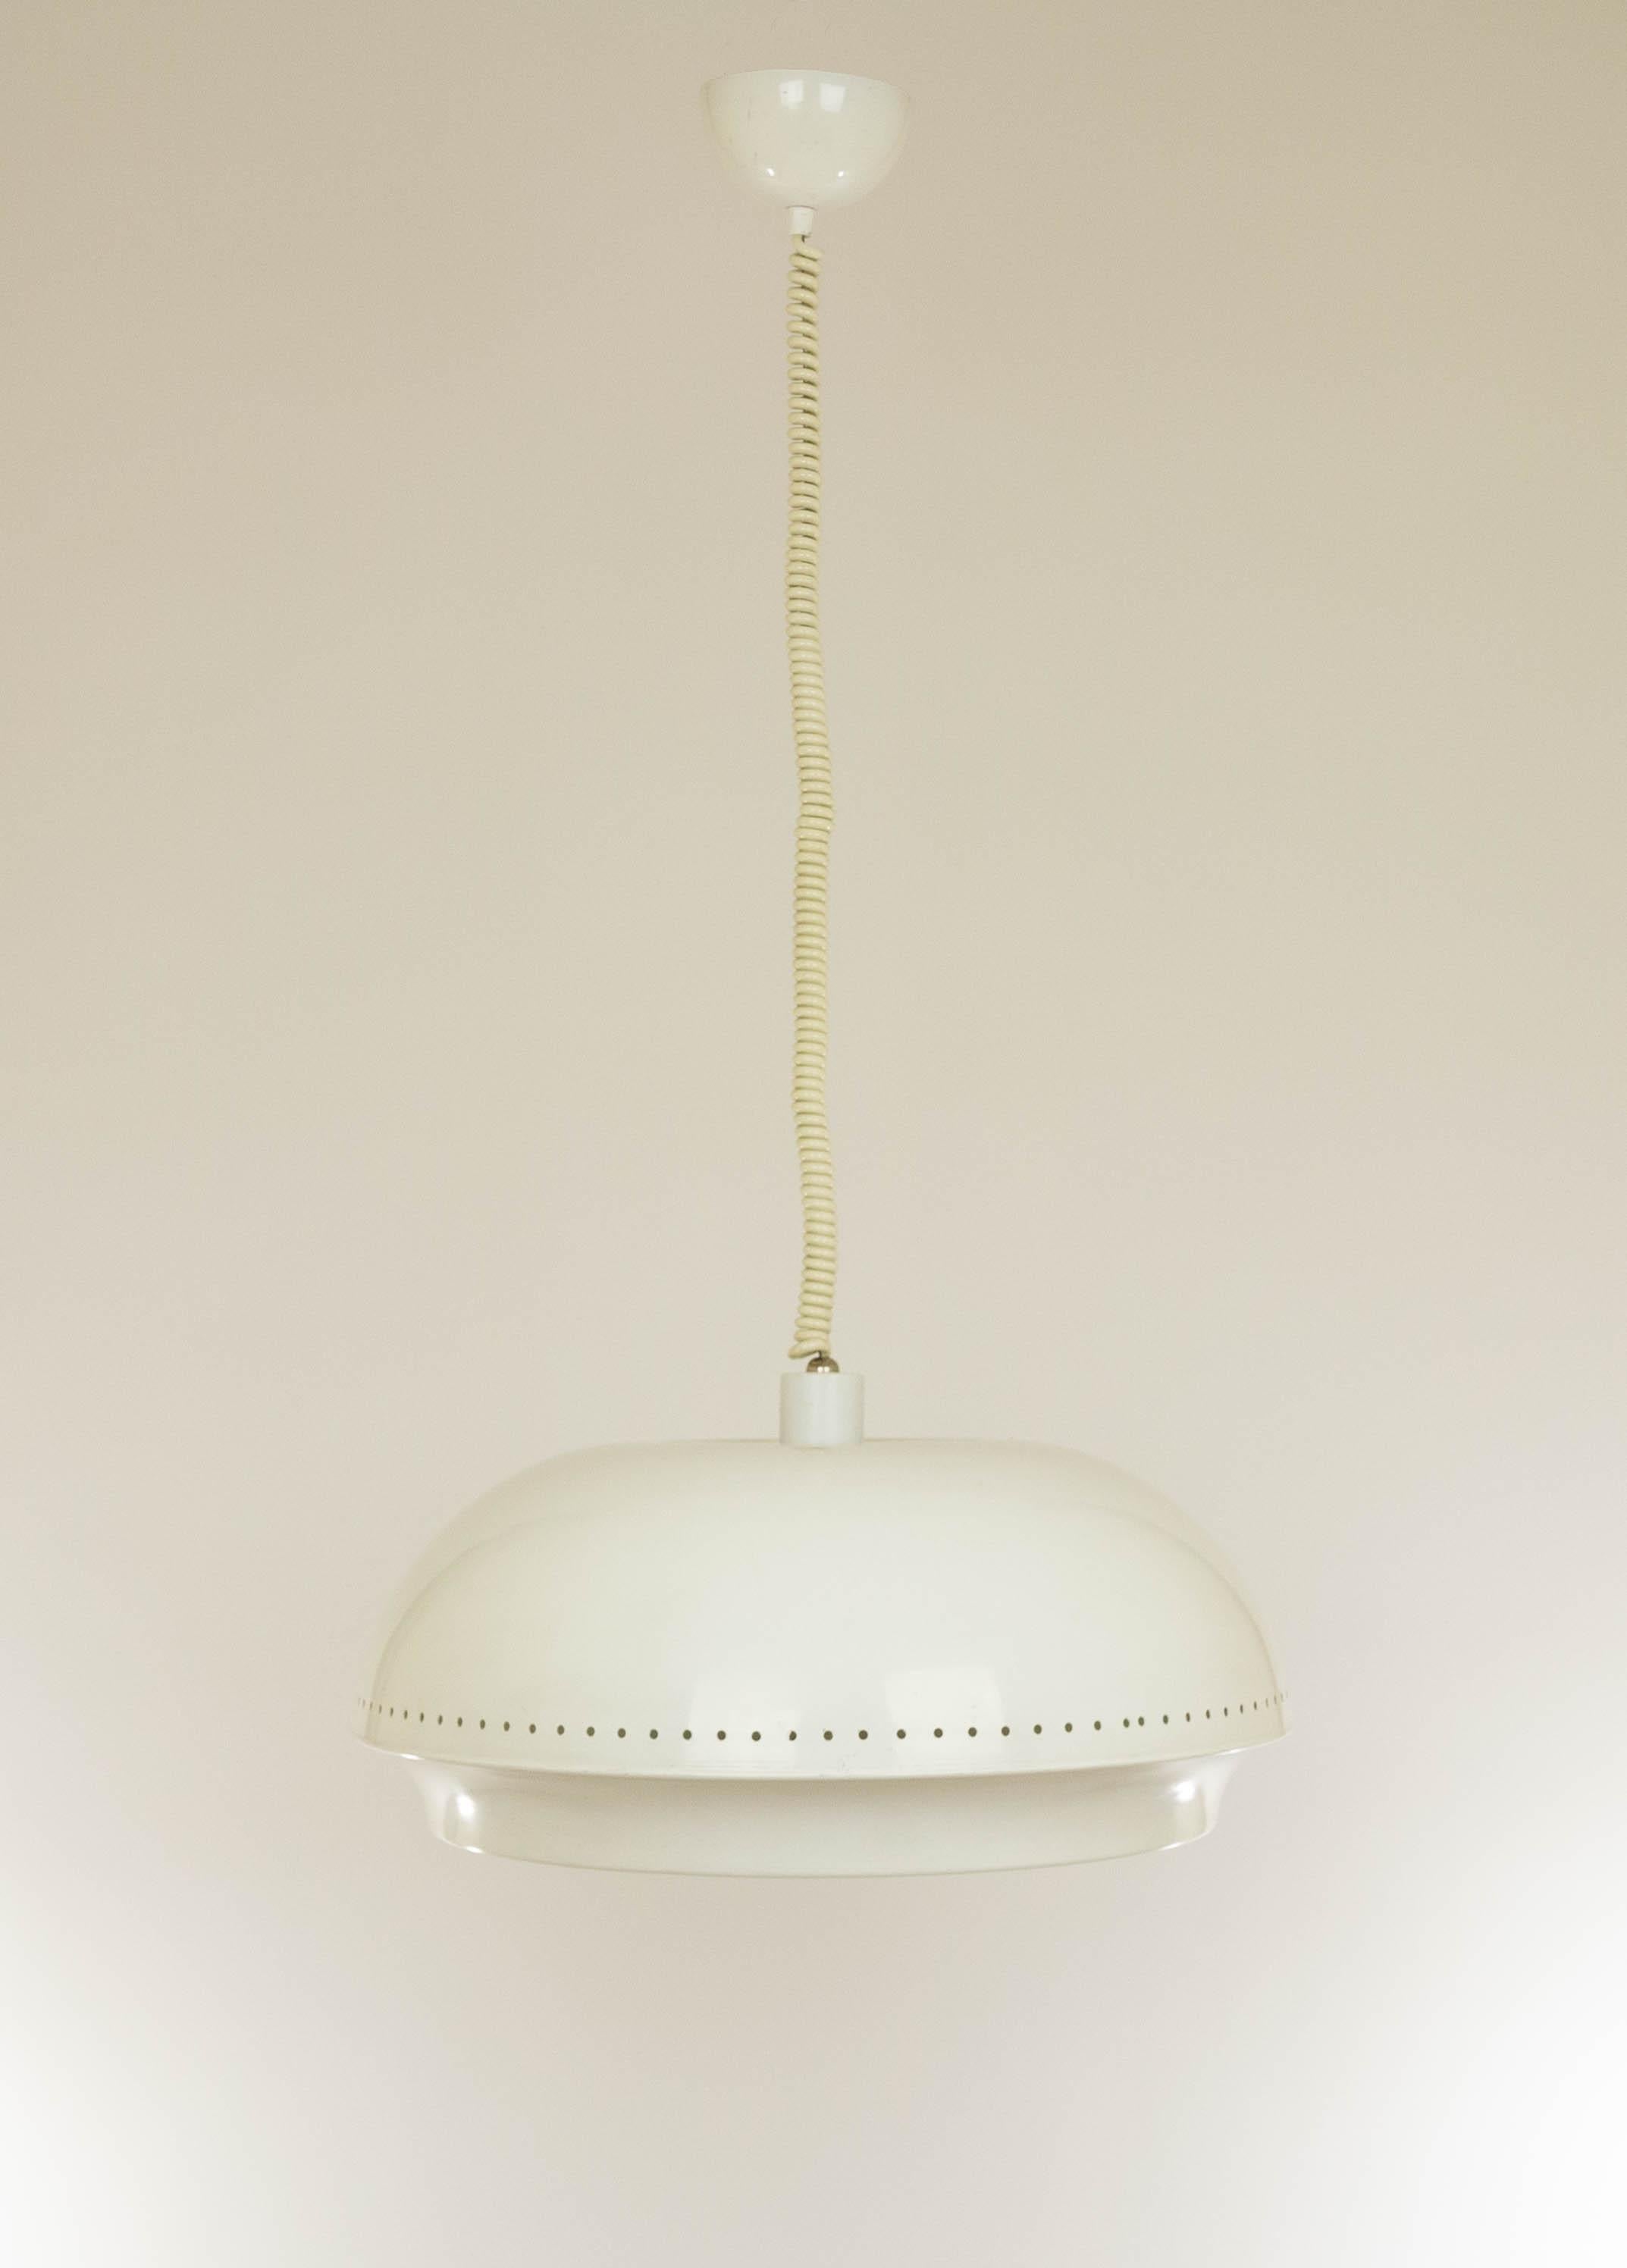 White Nigritella pendant designed by Tobia and Afra Scarpa for Italian Lighting manufacturer Flos in 1961.

This Nigritella pendant consists of a metal cap with in the middle a row of perforations forming a luminous decoration, a circular grate